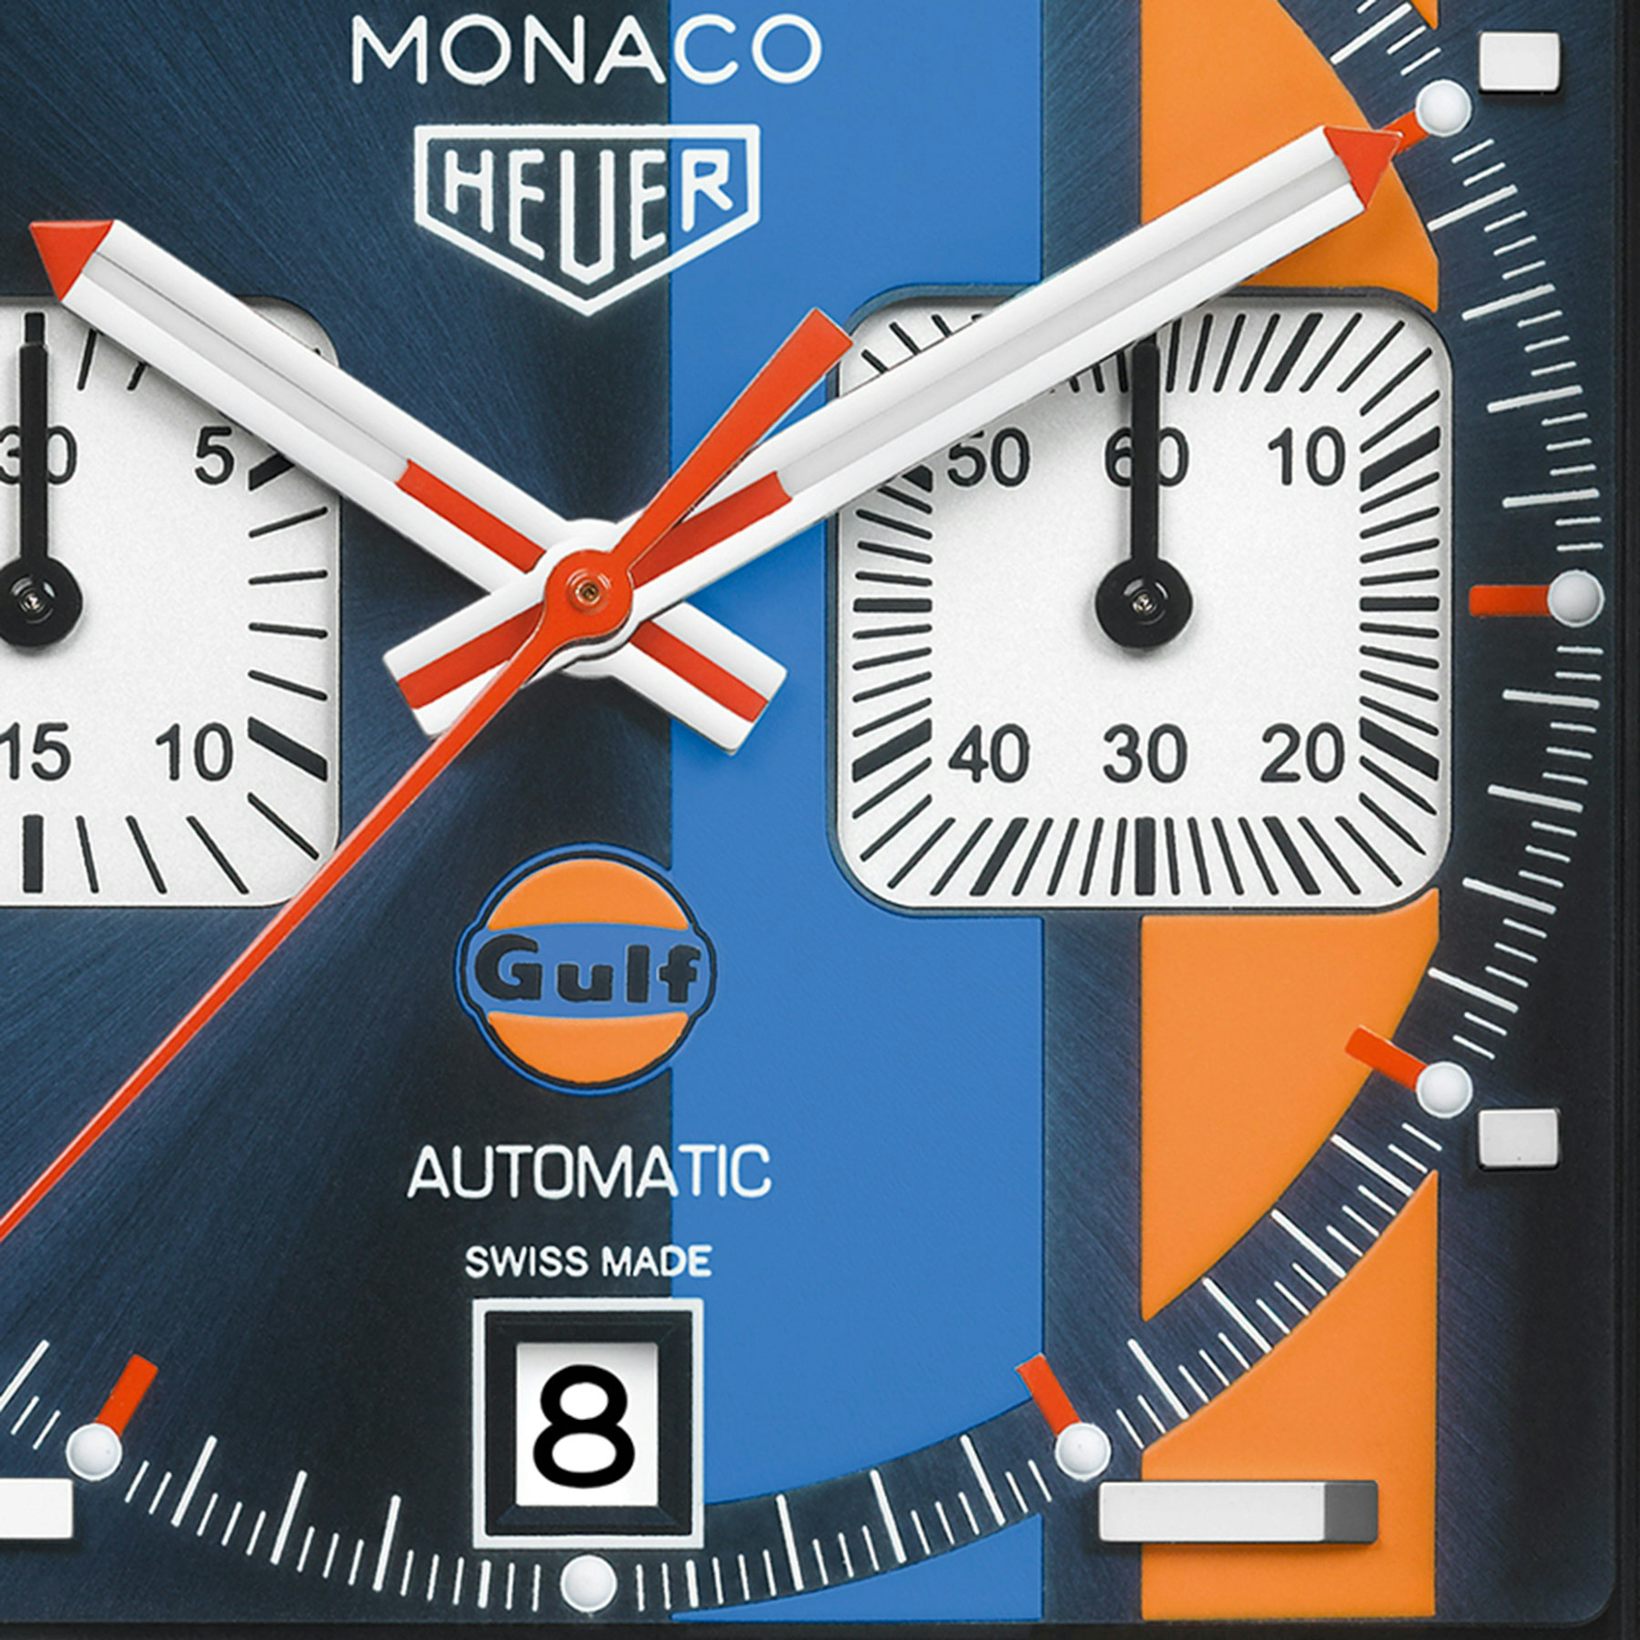 Introducing: The TAG Heuer Monaco Gulf Special Edition For 50th